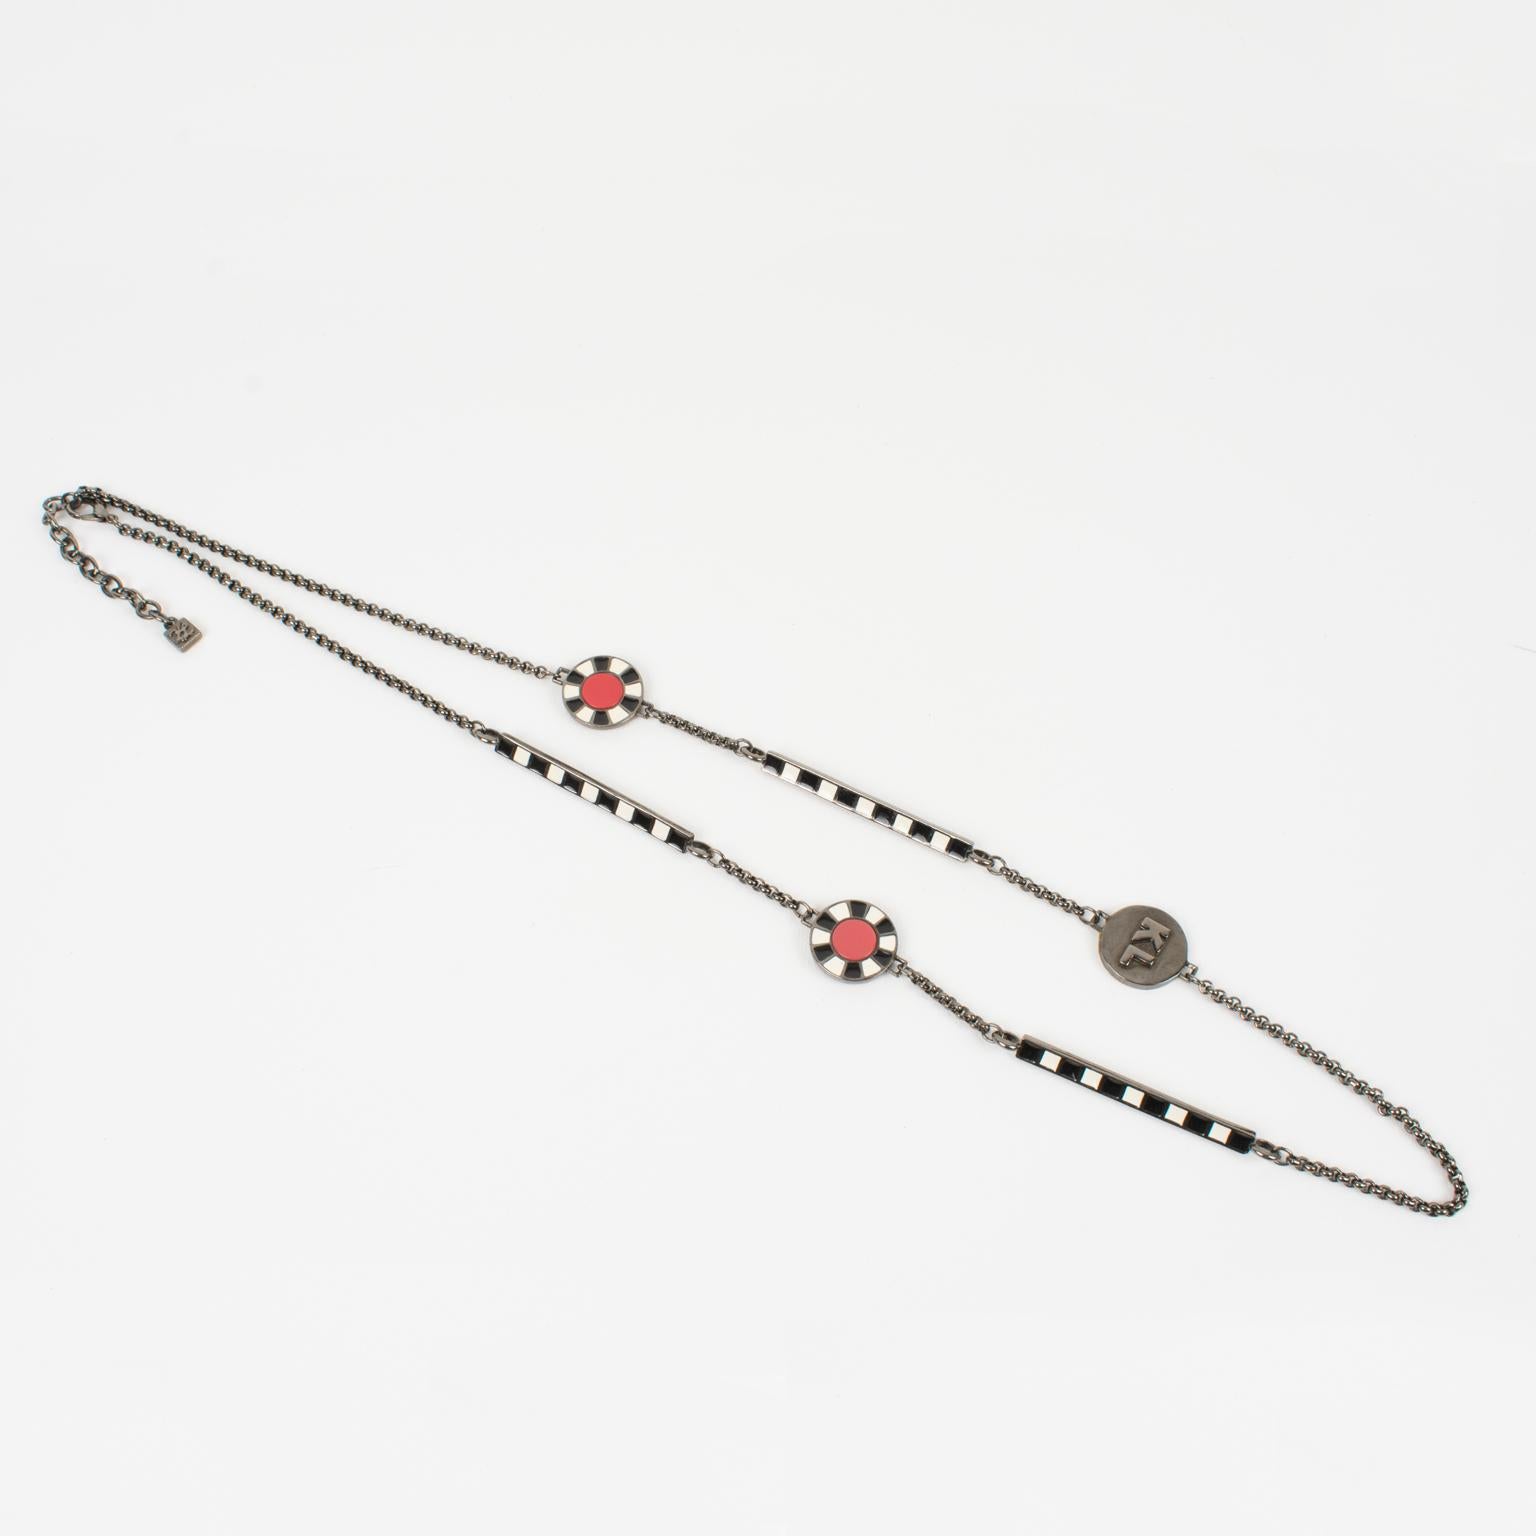 Karl Lagerfeld Gunmetal Long Necklace with Red and Black Enamel In Excellent Condition For Sale In Atlanta, GA